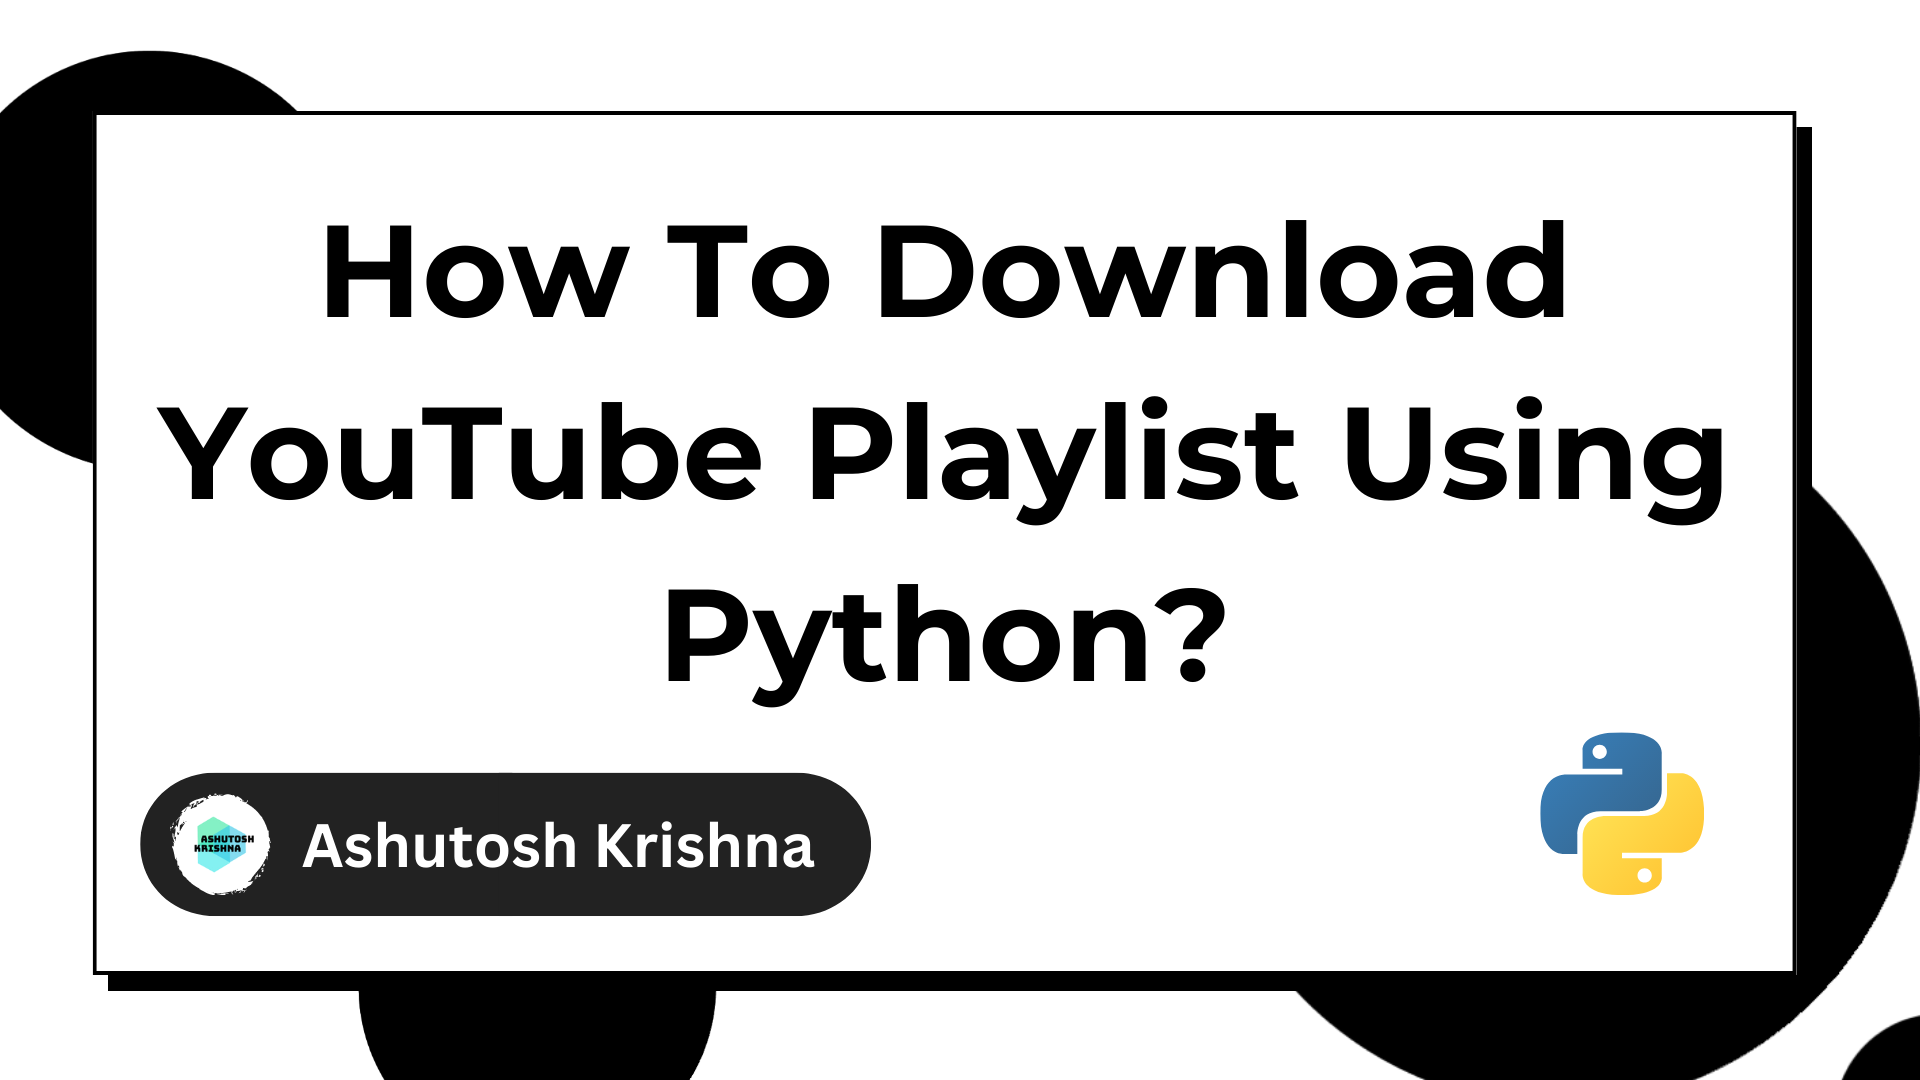 How To Download YouTube Playlist Using Python